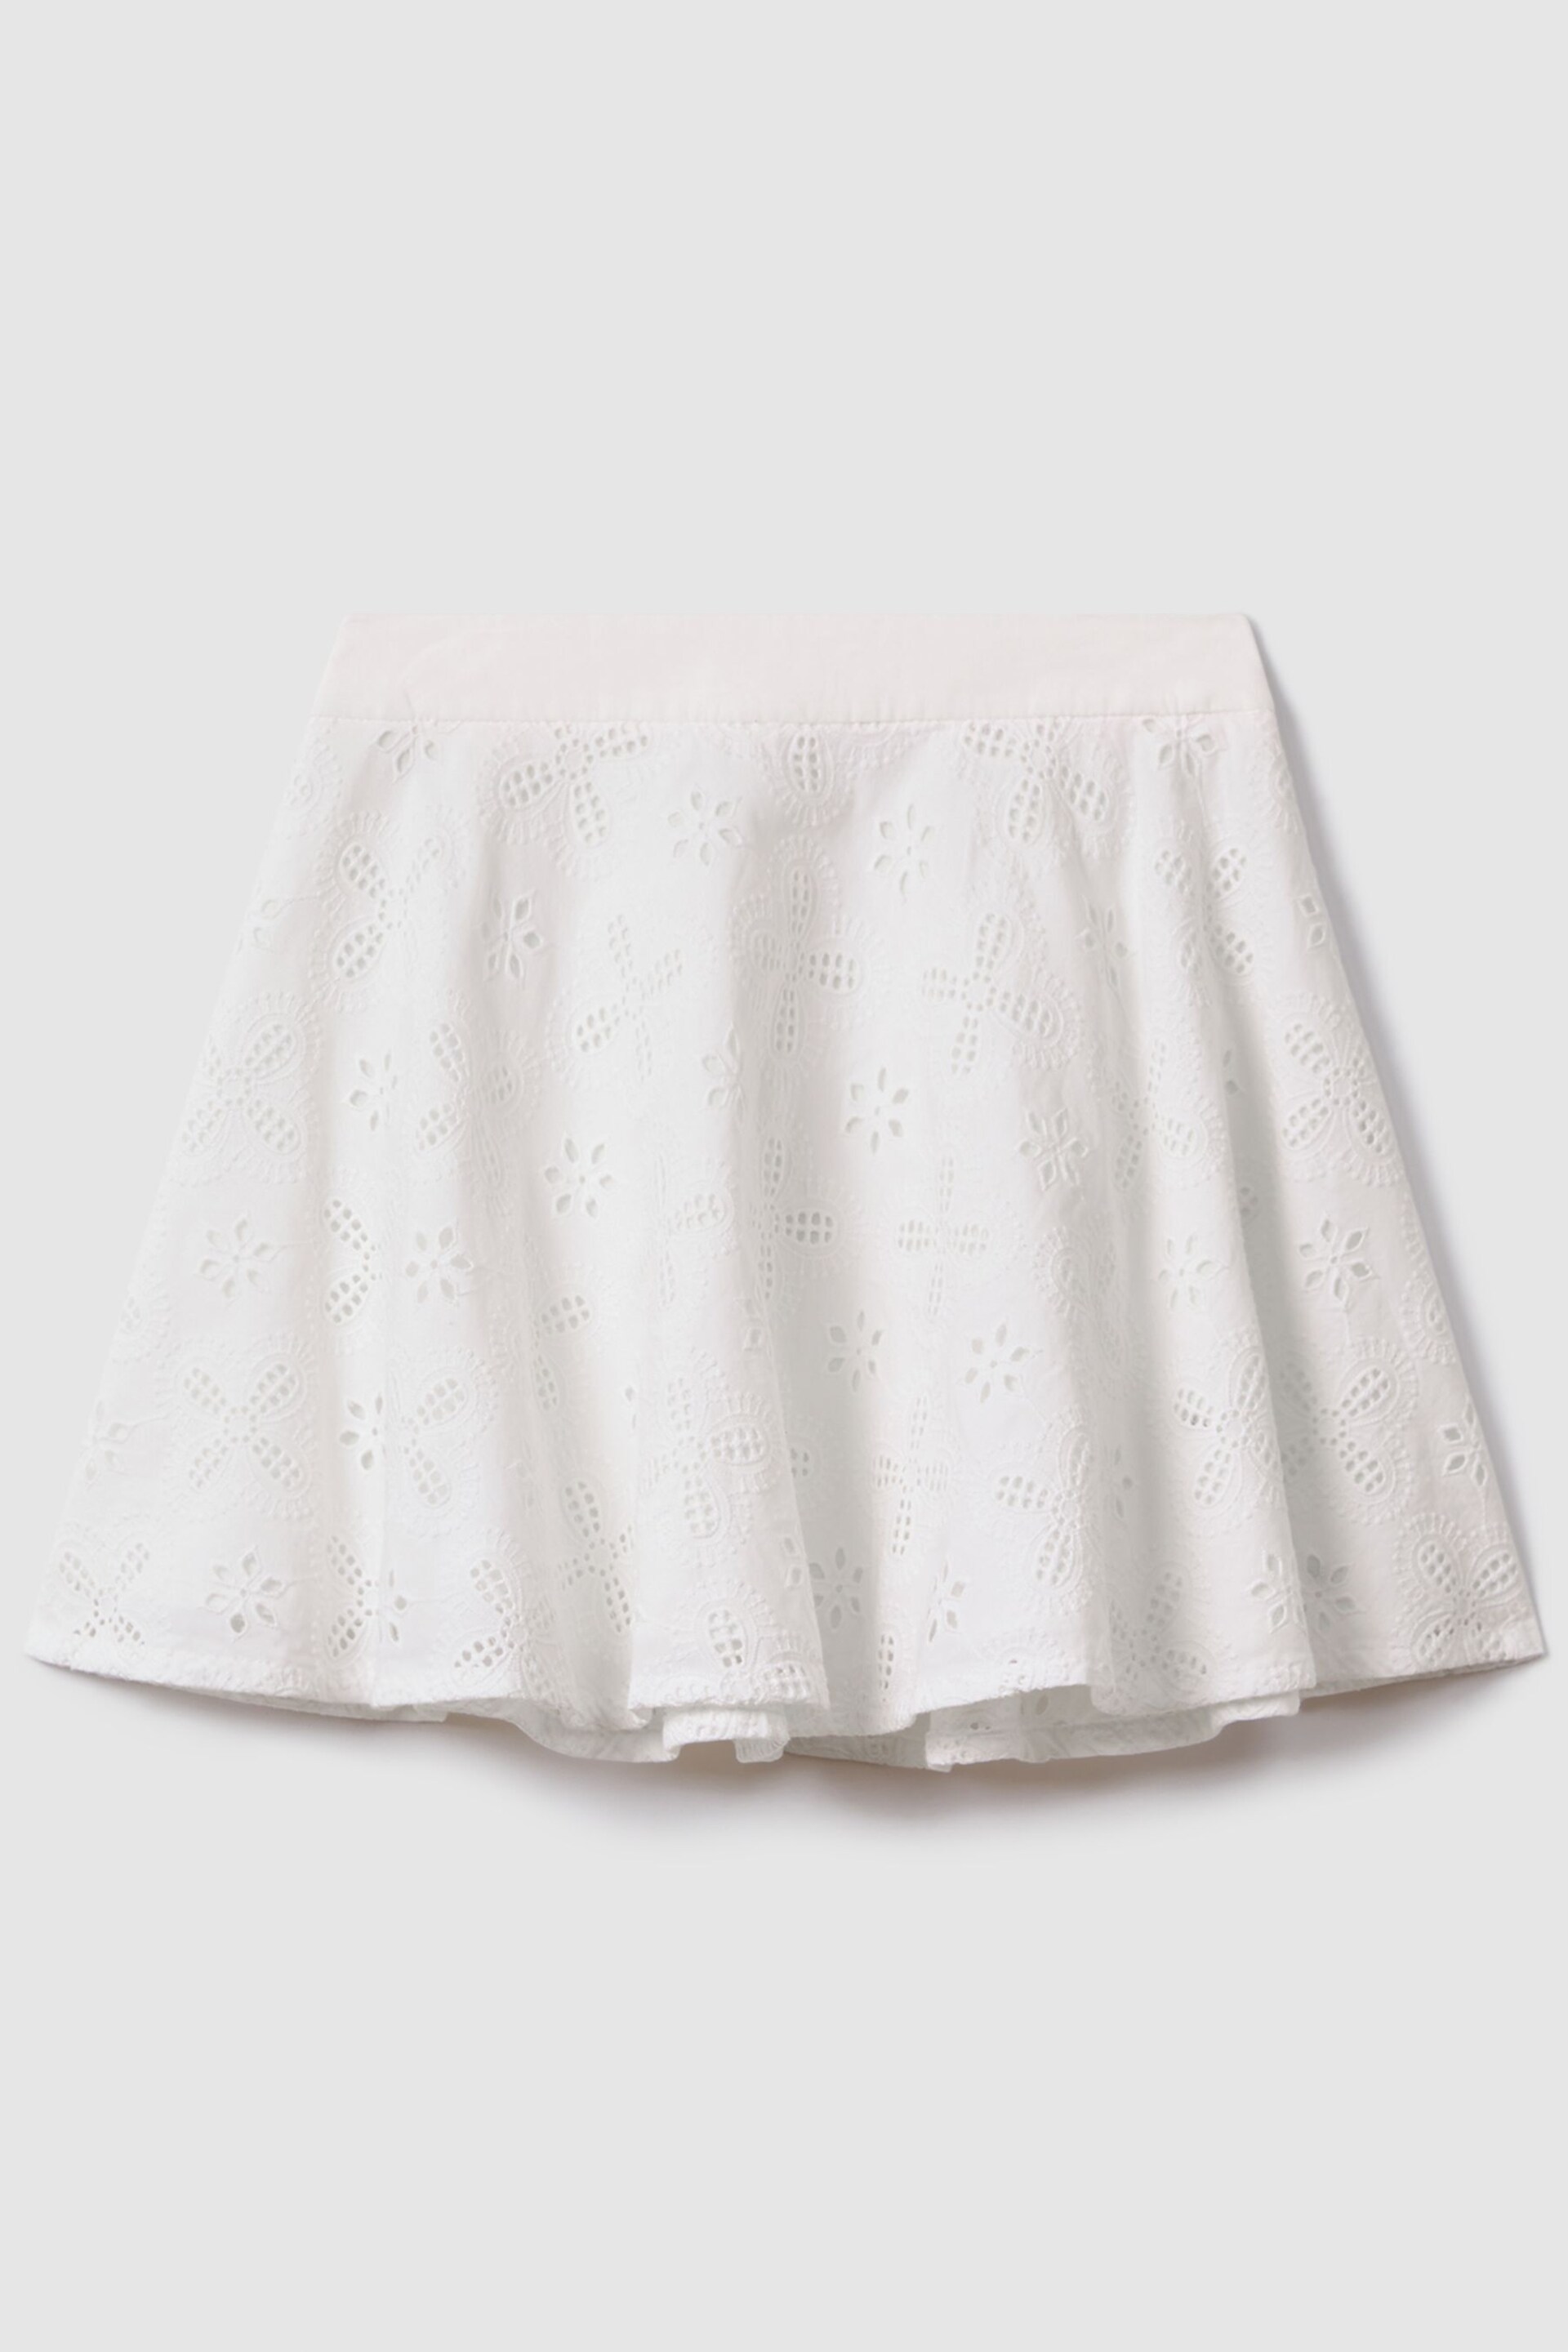 Reiss Ivory Nella Senior Cotton Broderie Lace Skirt - Image 2 of 7